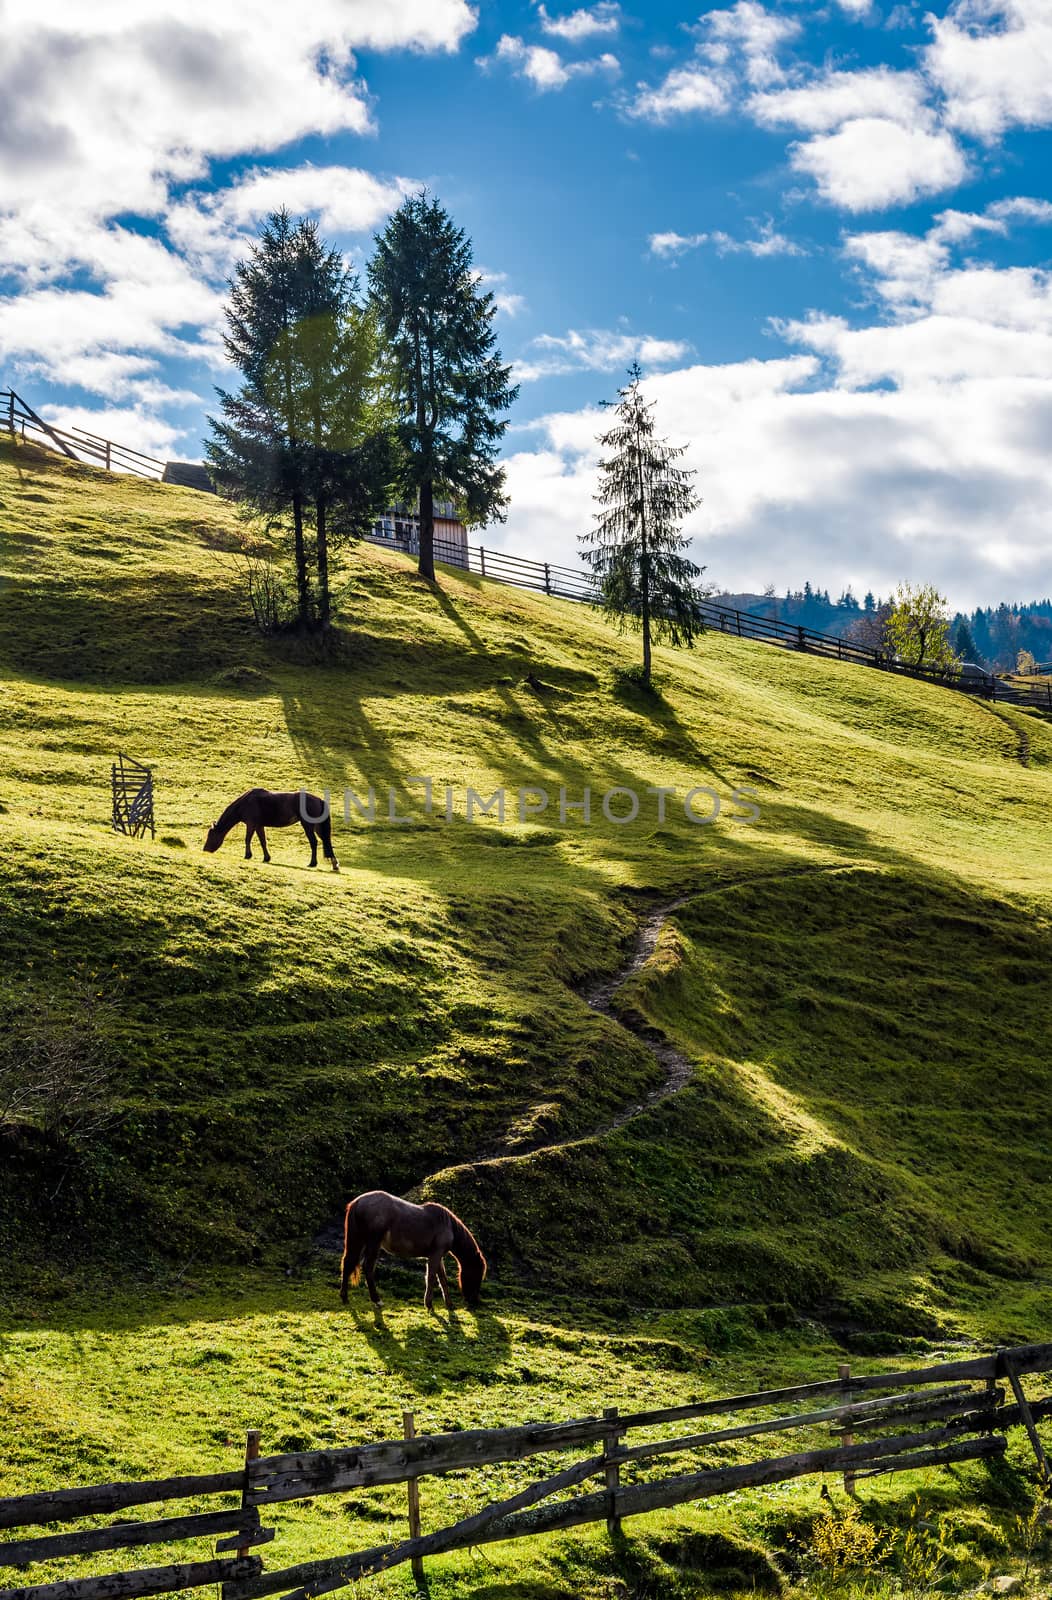 horses grazing on the gassy slope near the trees by Pellinni